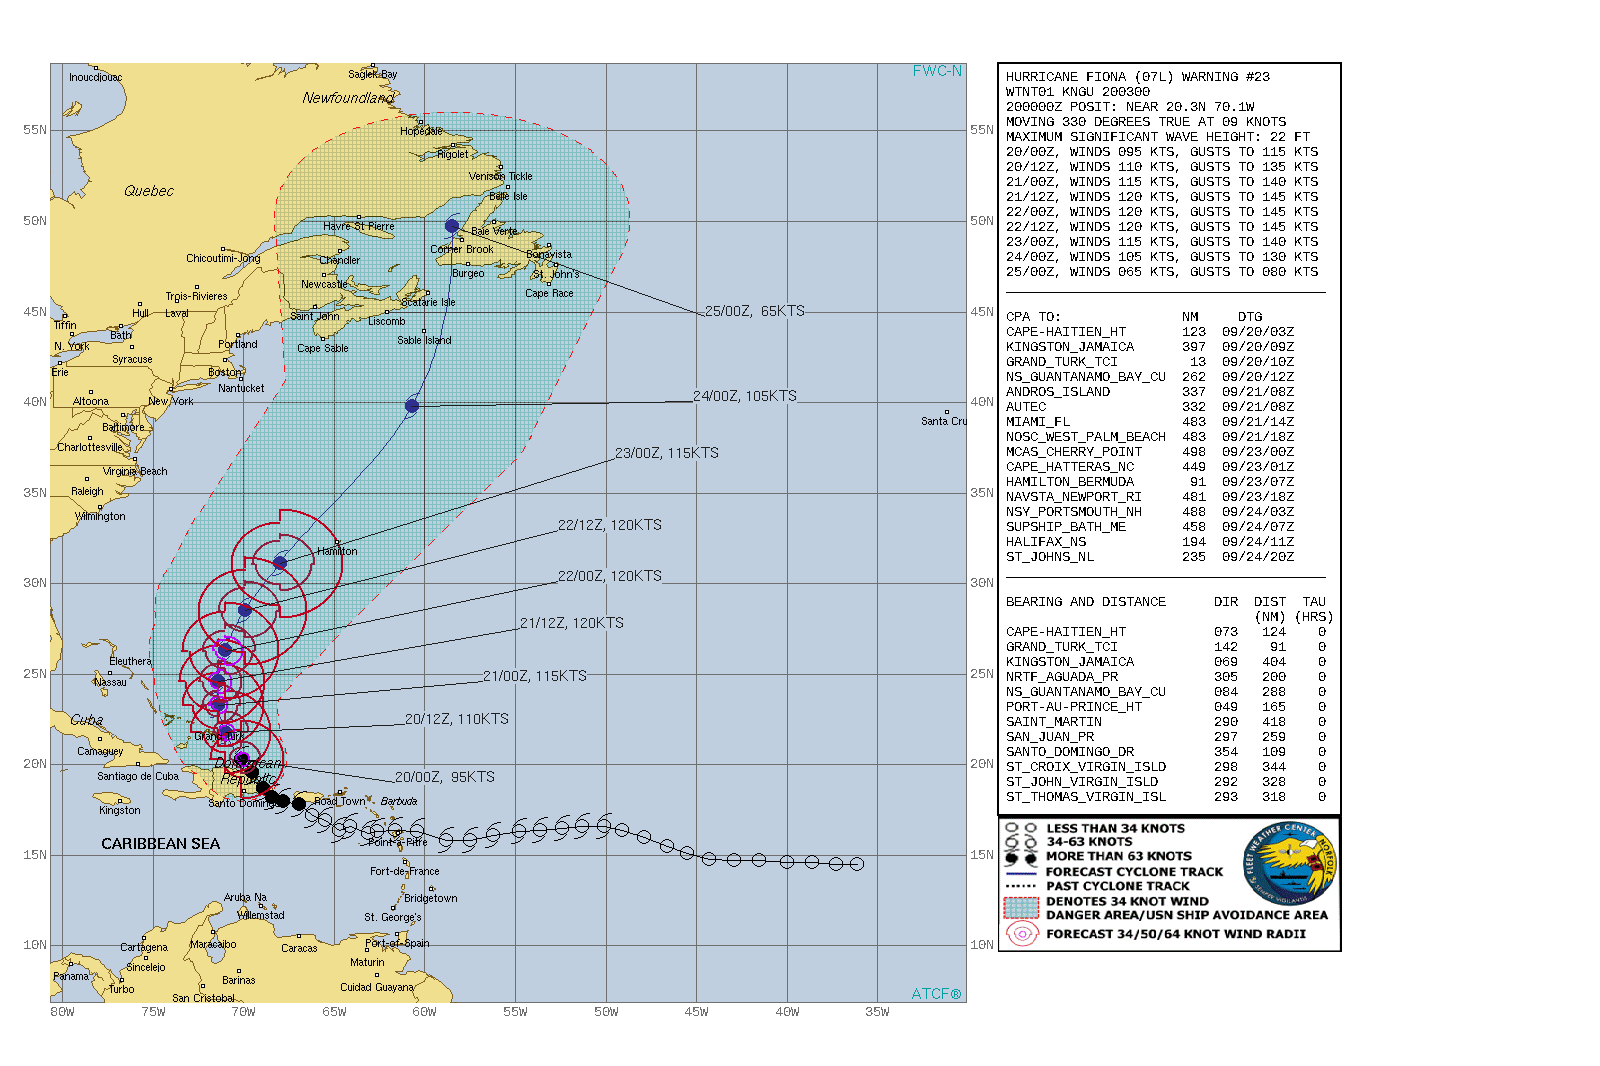 16W(NANMADOL) final warning//Invest 94W on the map//TS 14E(MADELINE)//HU 07L(FIONA): up to CAT 4 after 24h//Invest 97L//20/06utc